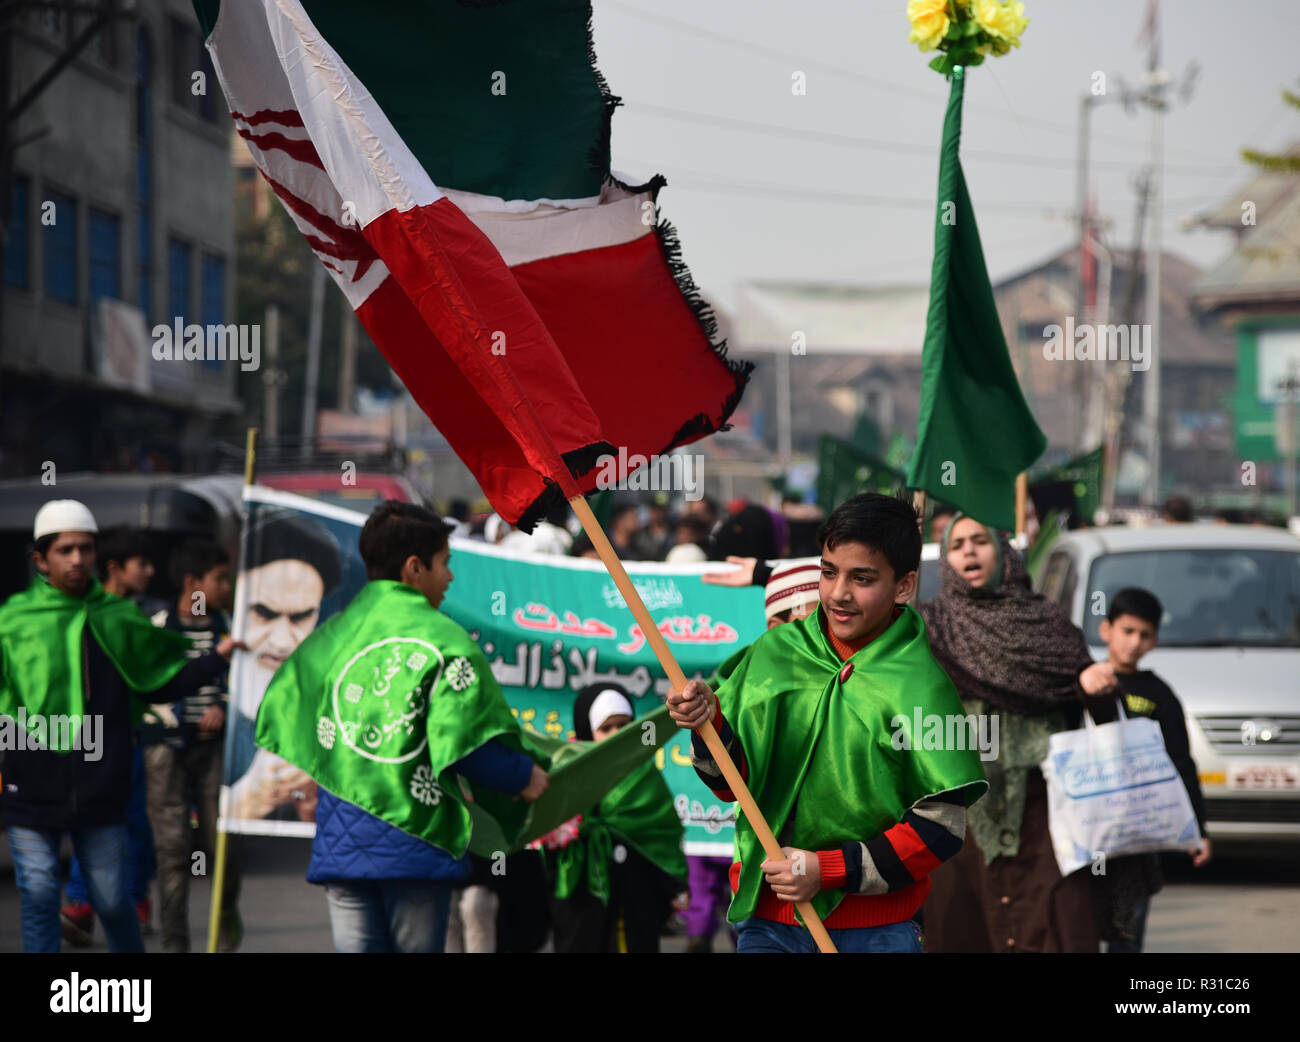 Kashmiri Shia Muslim students waves flags during a march rally marking Eid-i-Milad-un-Nabi, the birth anniversary of Prophet Muhammad PBUH. Muslims across the world celebrated Eid-e-Milad-un-Nabi, the birth anniversary of the Prophet Mohammed on 12 Rabil ul Awal, a month of the Muslim calendar which falls on 21 November 2018. Stock Photo